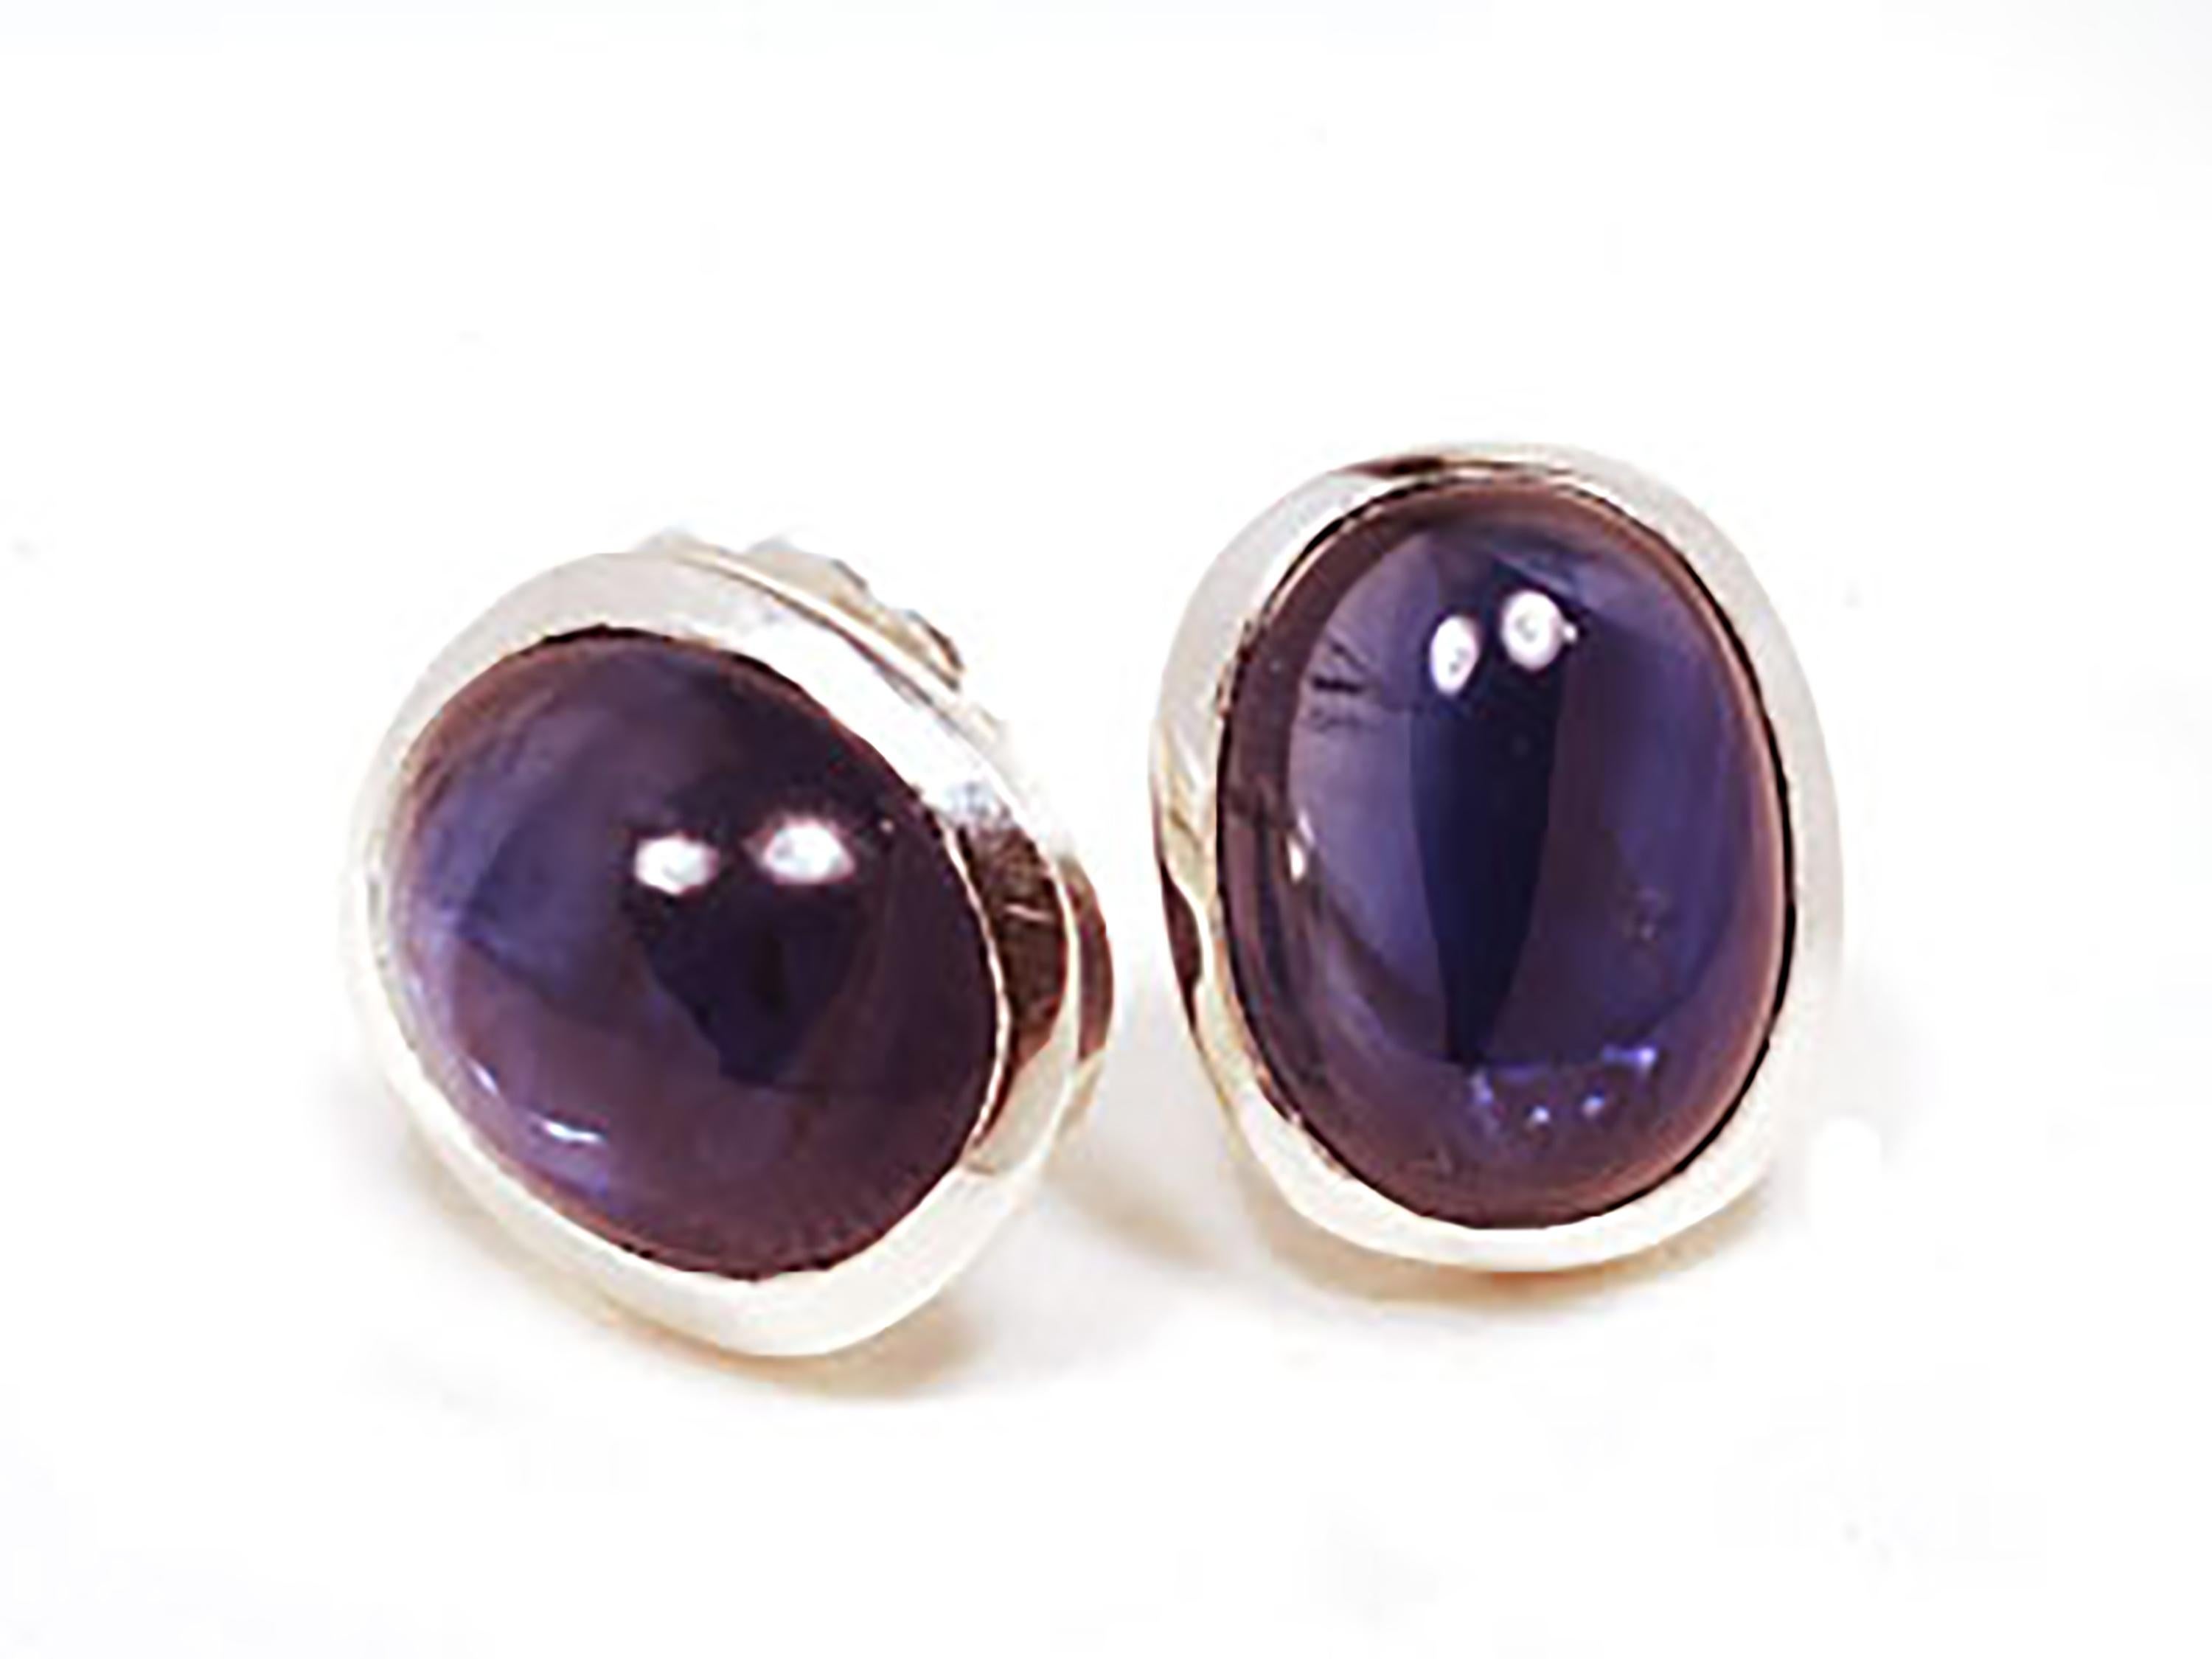 Contemporary Cabochon Sapphire Bezel Set Silver Stud Earrings Weighing 8 Carat